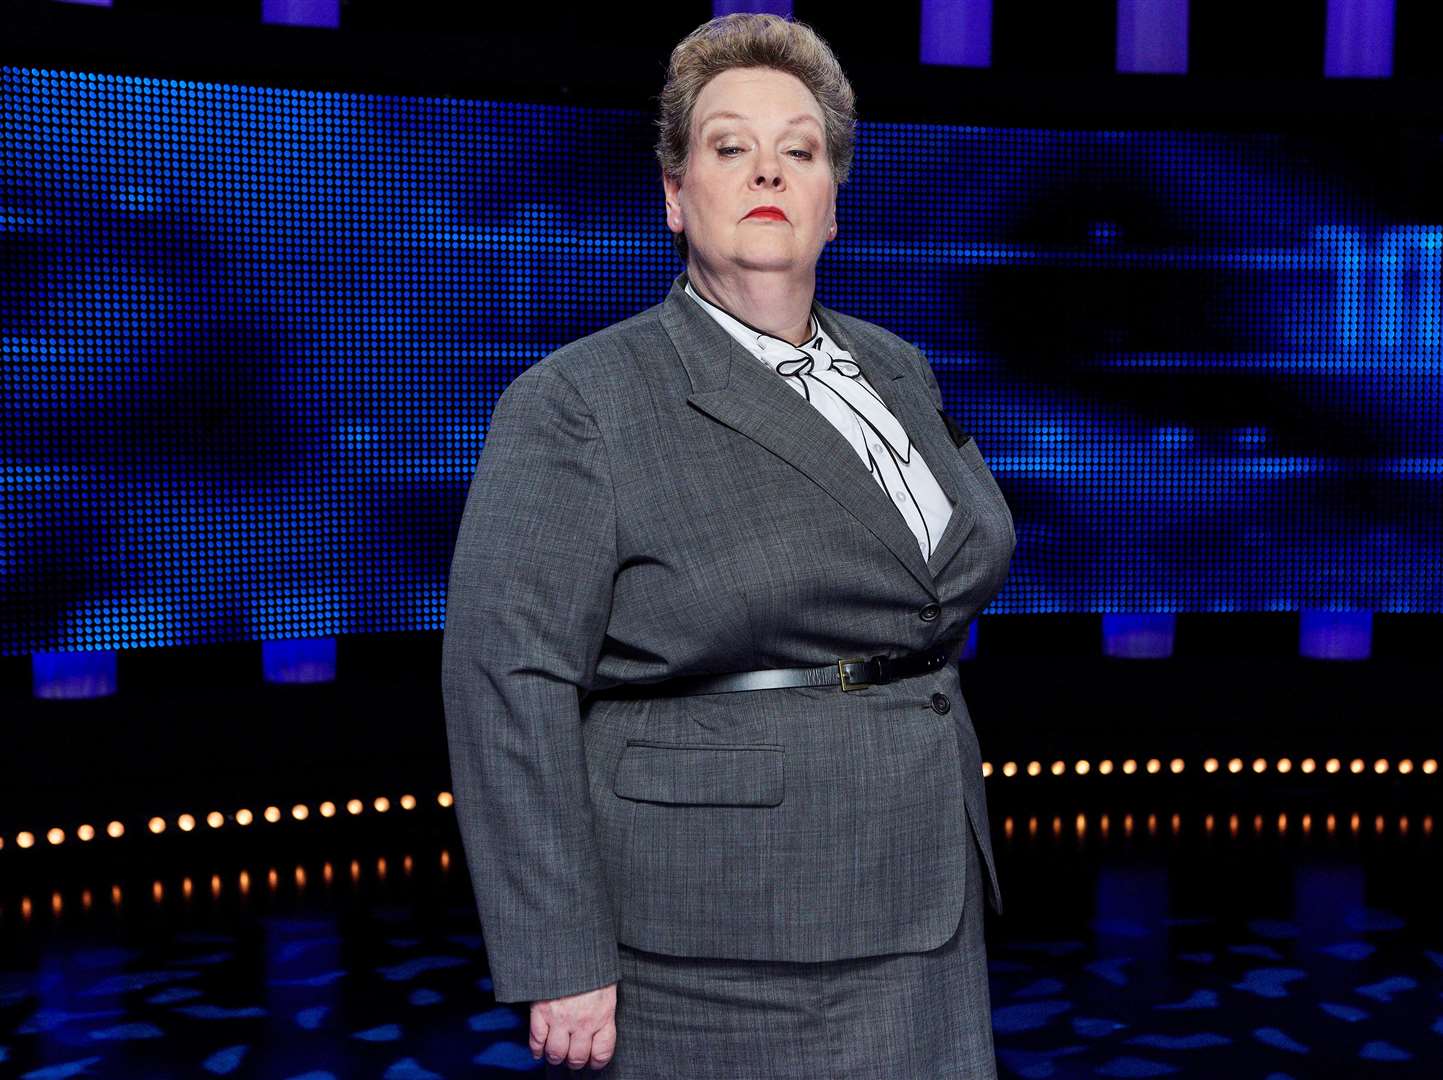 Matt faced off against The Governess on Tuesday's show, who defeated him and teammate Dave in under a minute. Picture: ITV